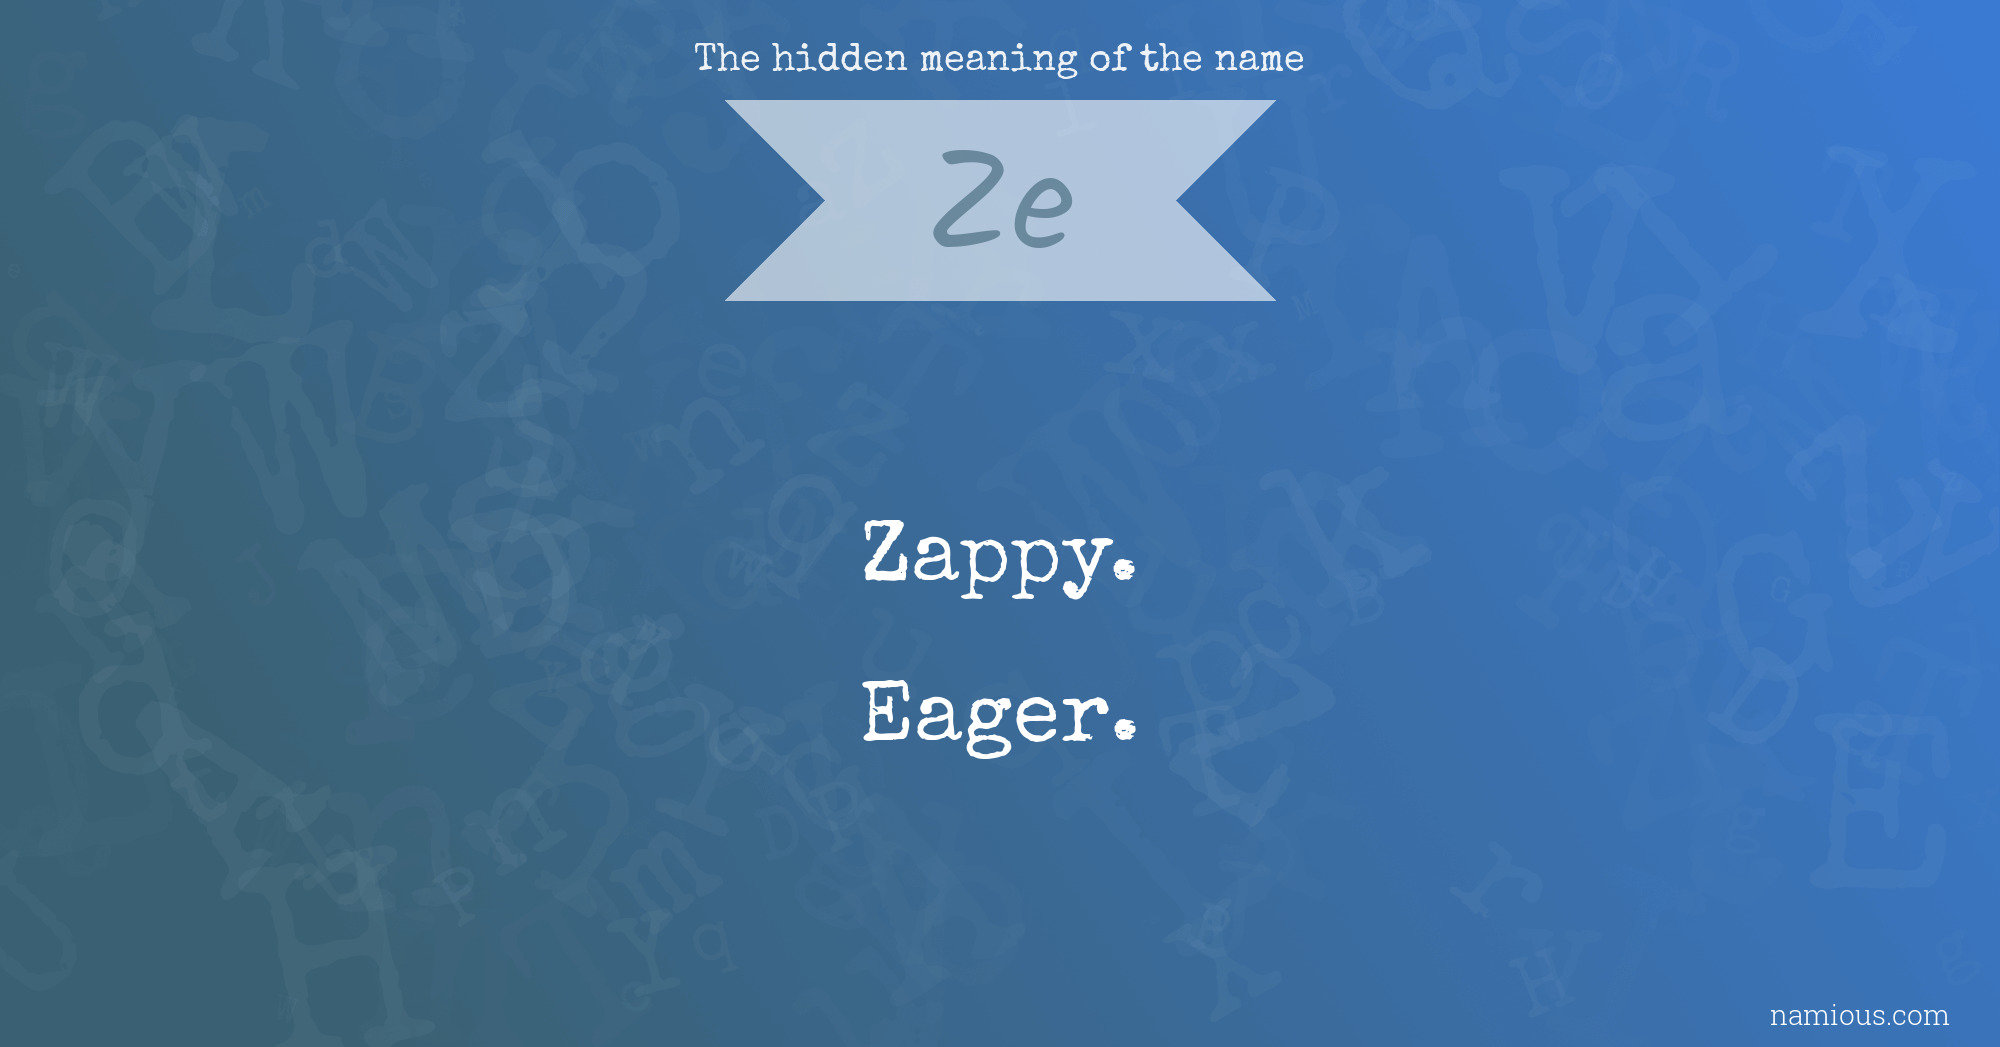 The hidden meaning of the name Ze